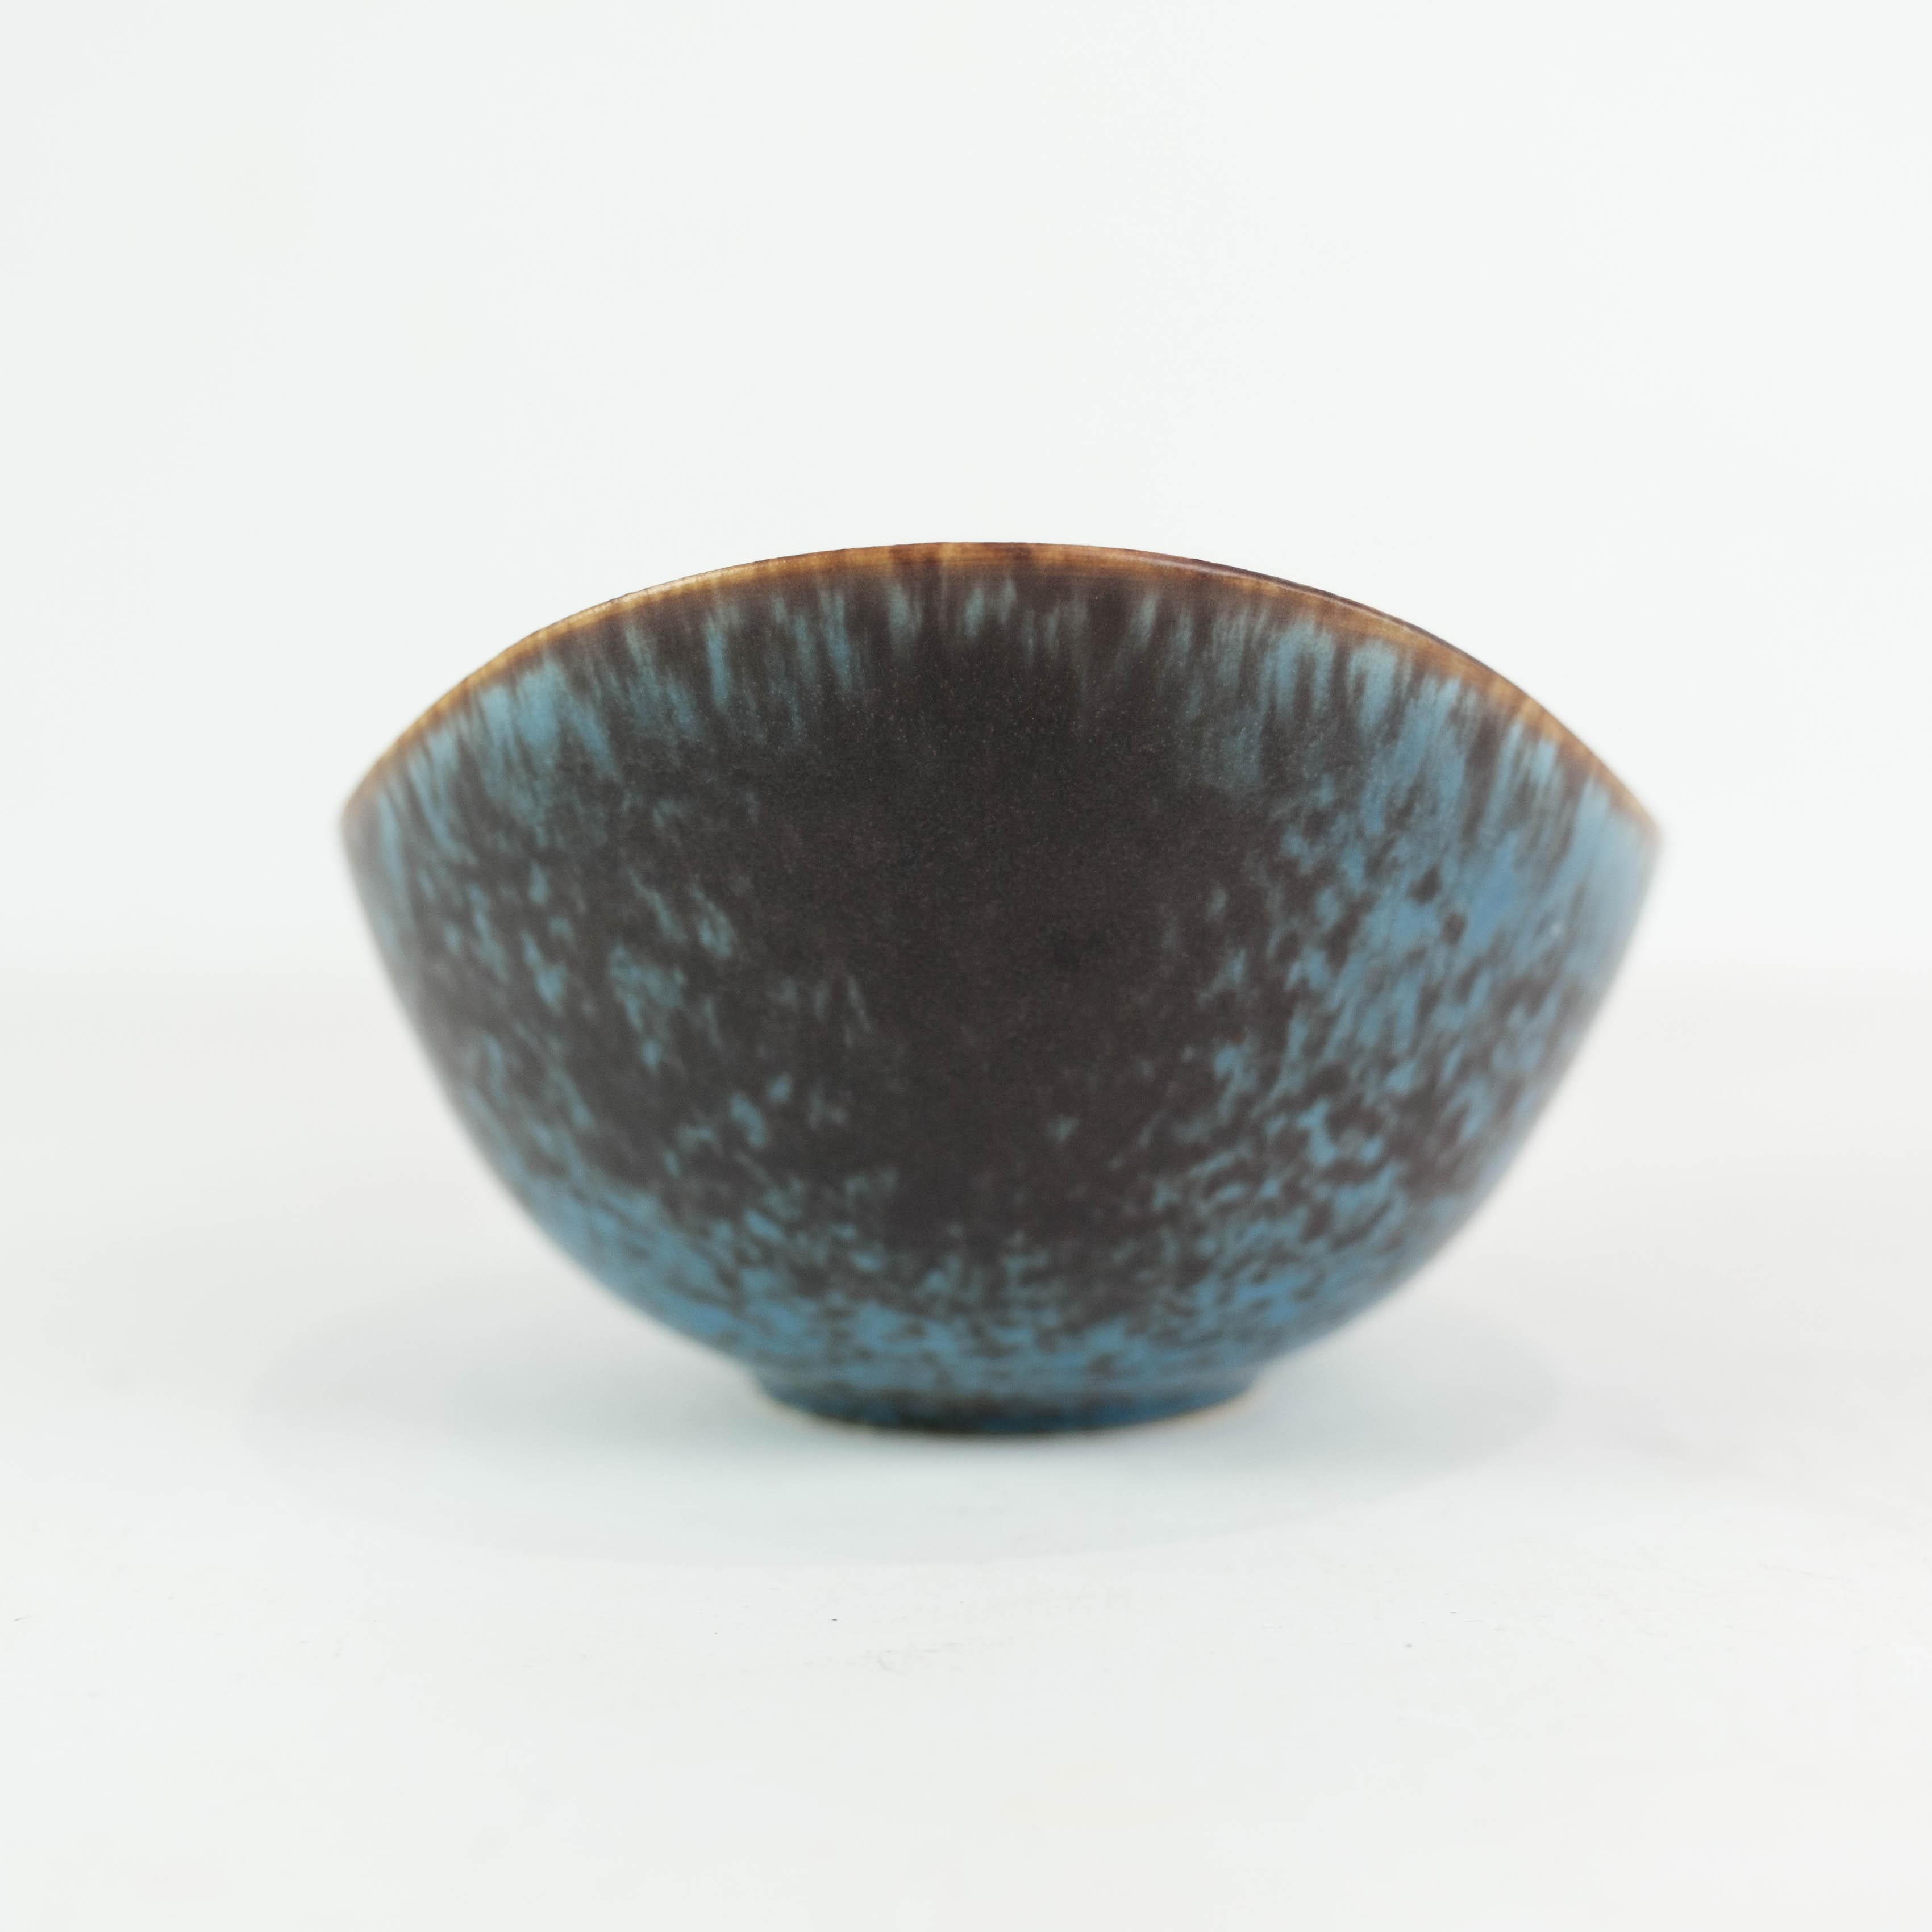 Ceramic Bowl with Blue and Brown Glace by the Artist Gunnar Nylund for Rørstrand 1